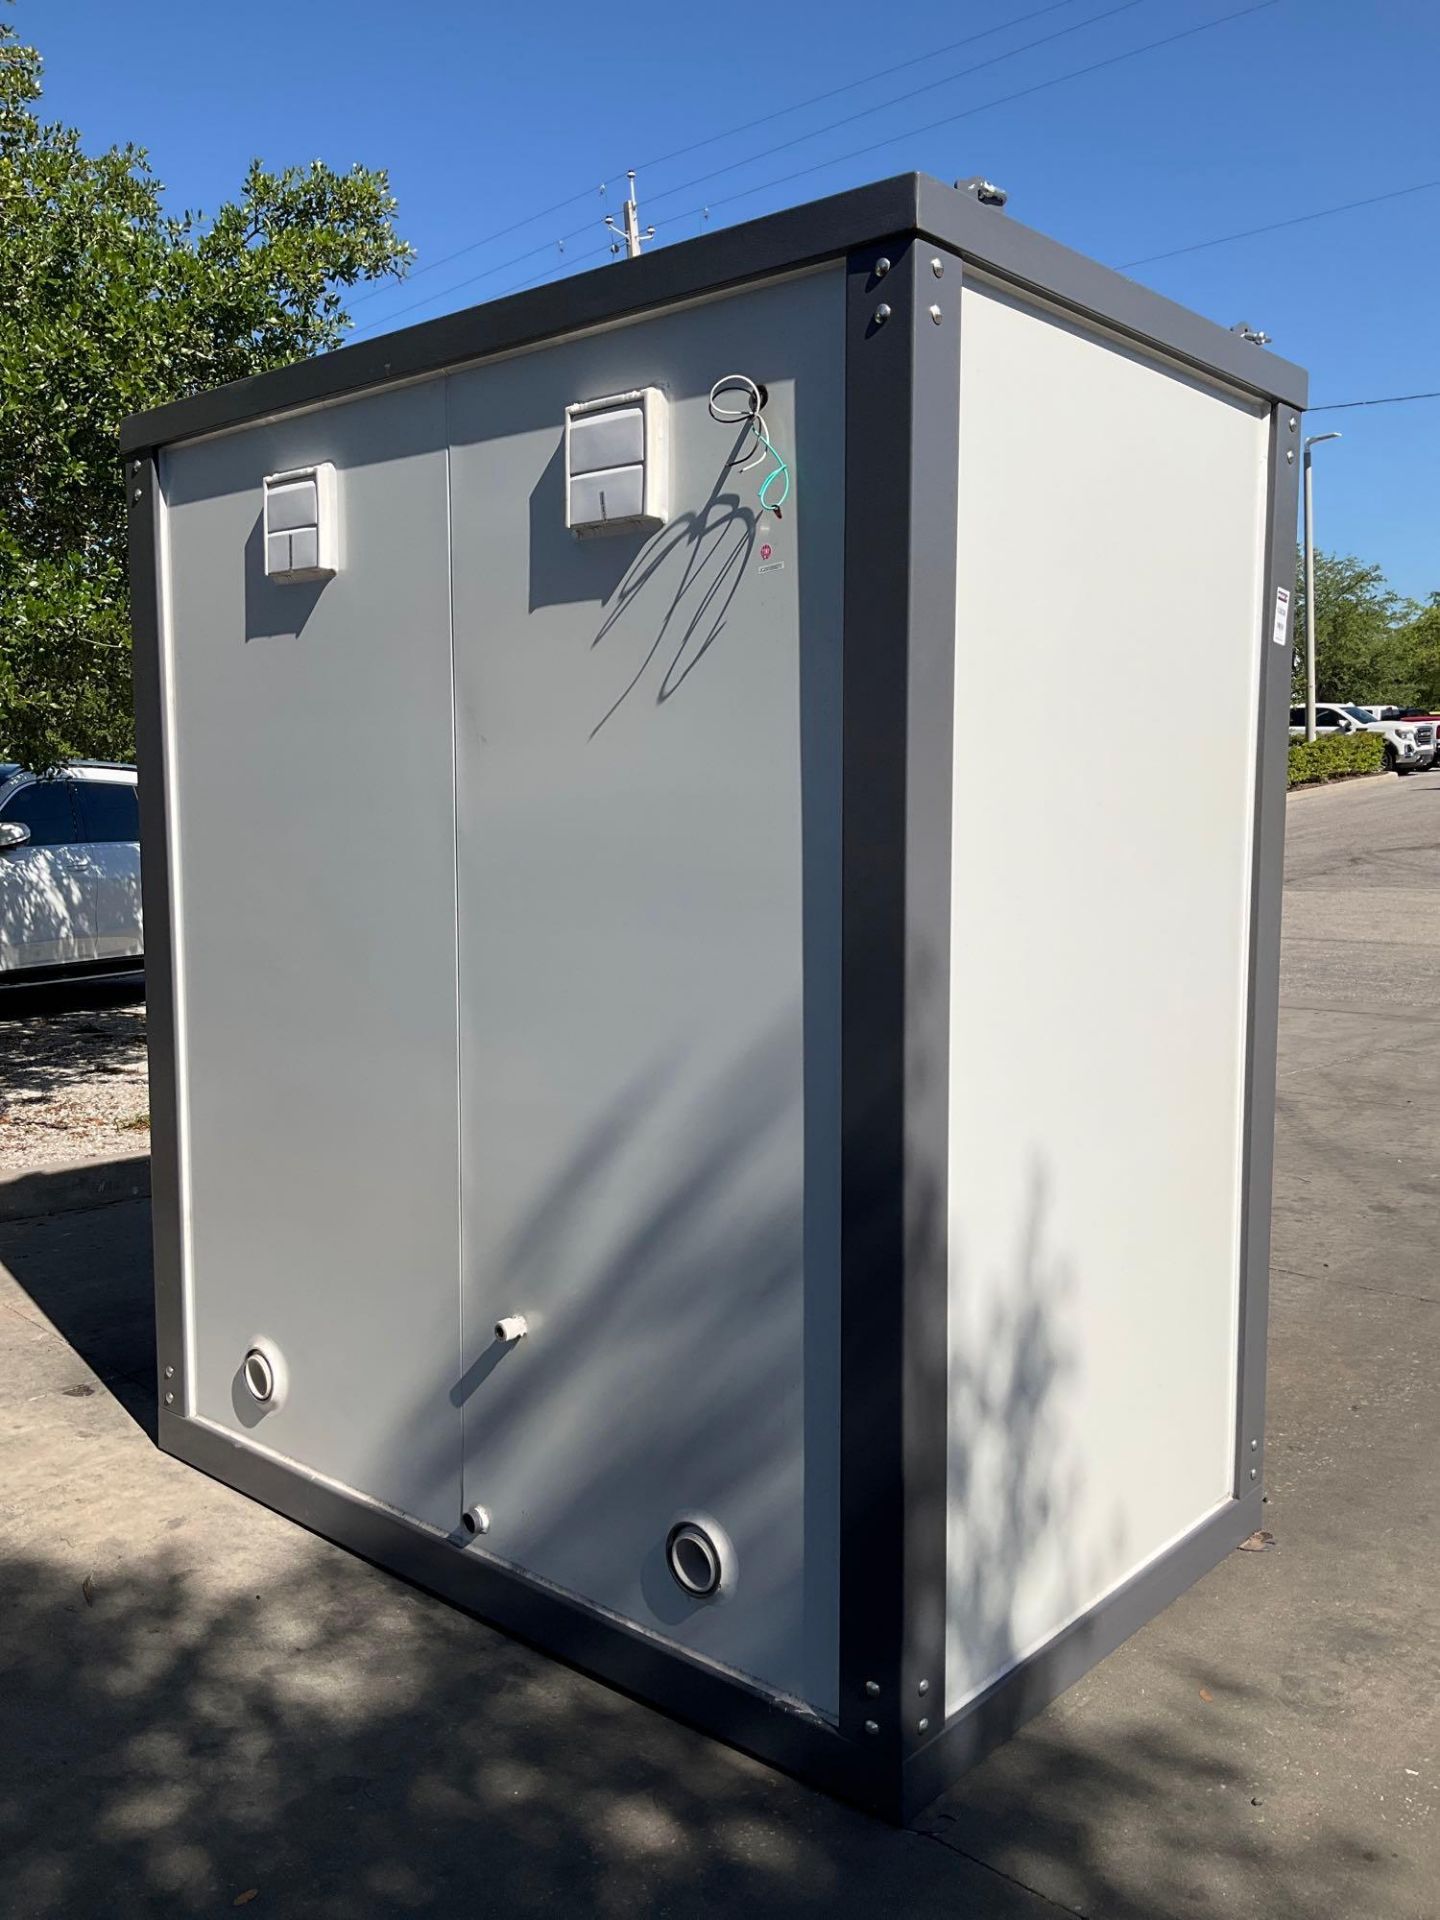 UNUSED PORTABLE DOUBLE BATHROOM UNIT, 2 STALLS, ELECTRIC & PLUMBING HOOK UP WITH EXTERIOR PLUMBING C - Image 2 of 12